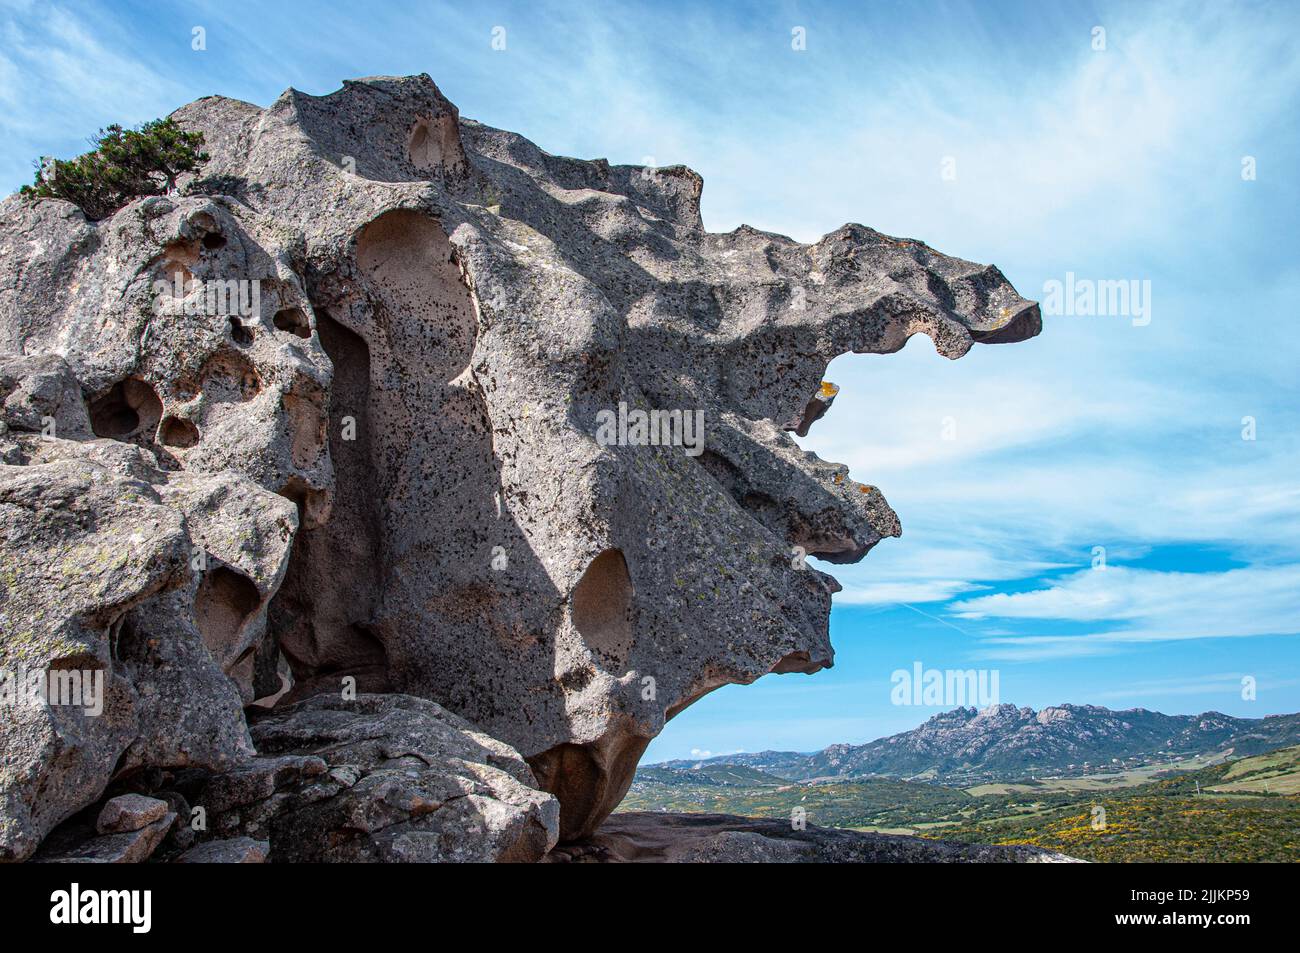 A scenic view of a rock formation outdoors on cloudy sky background Stock Photo